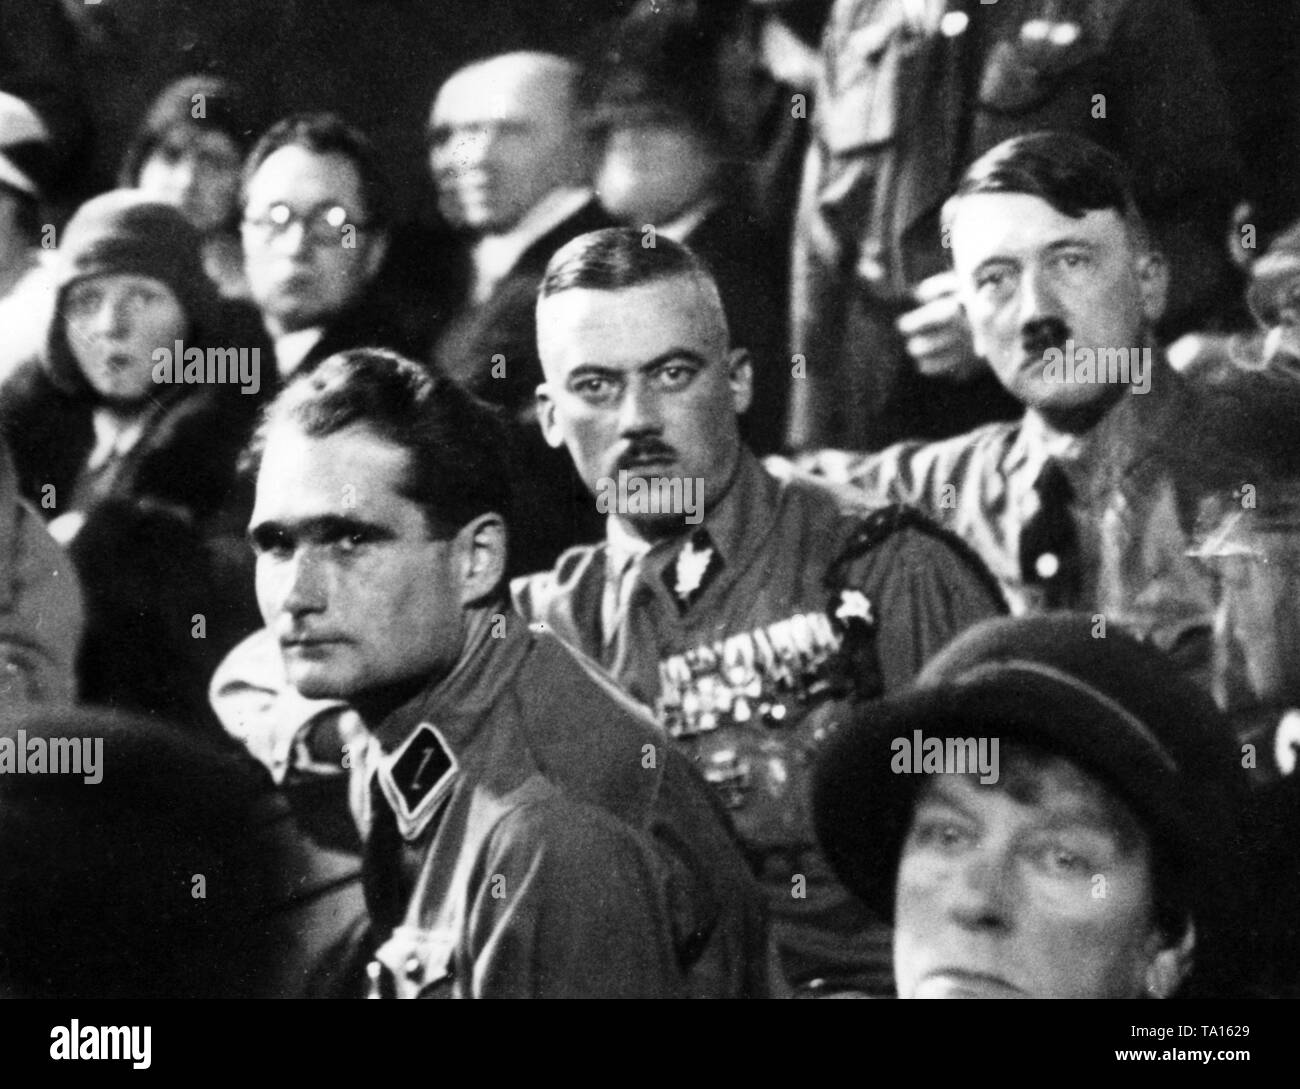 From left: the deputy of Hitler, Rudolf Hess, the head of the SA Franz von Pfeffer and Adolf Hitler during a speech of Privy Councilor Alfred Hugenberg in the Munich Circus Krone. Occasion of this speech was the referendum against the adoption of the Young Plan to regulate the reparations debt. The 'Reichsausschuss fuer den Volksbegehren' (Reich Committe for Referendum), in which all the anti-Republican parties, including the NSDAP, are represented, becomes a springboard to Adolf Hitler into the great politics. Stock Photo